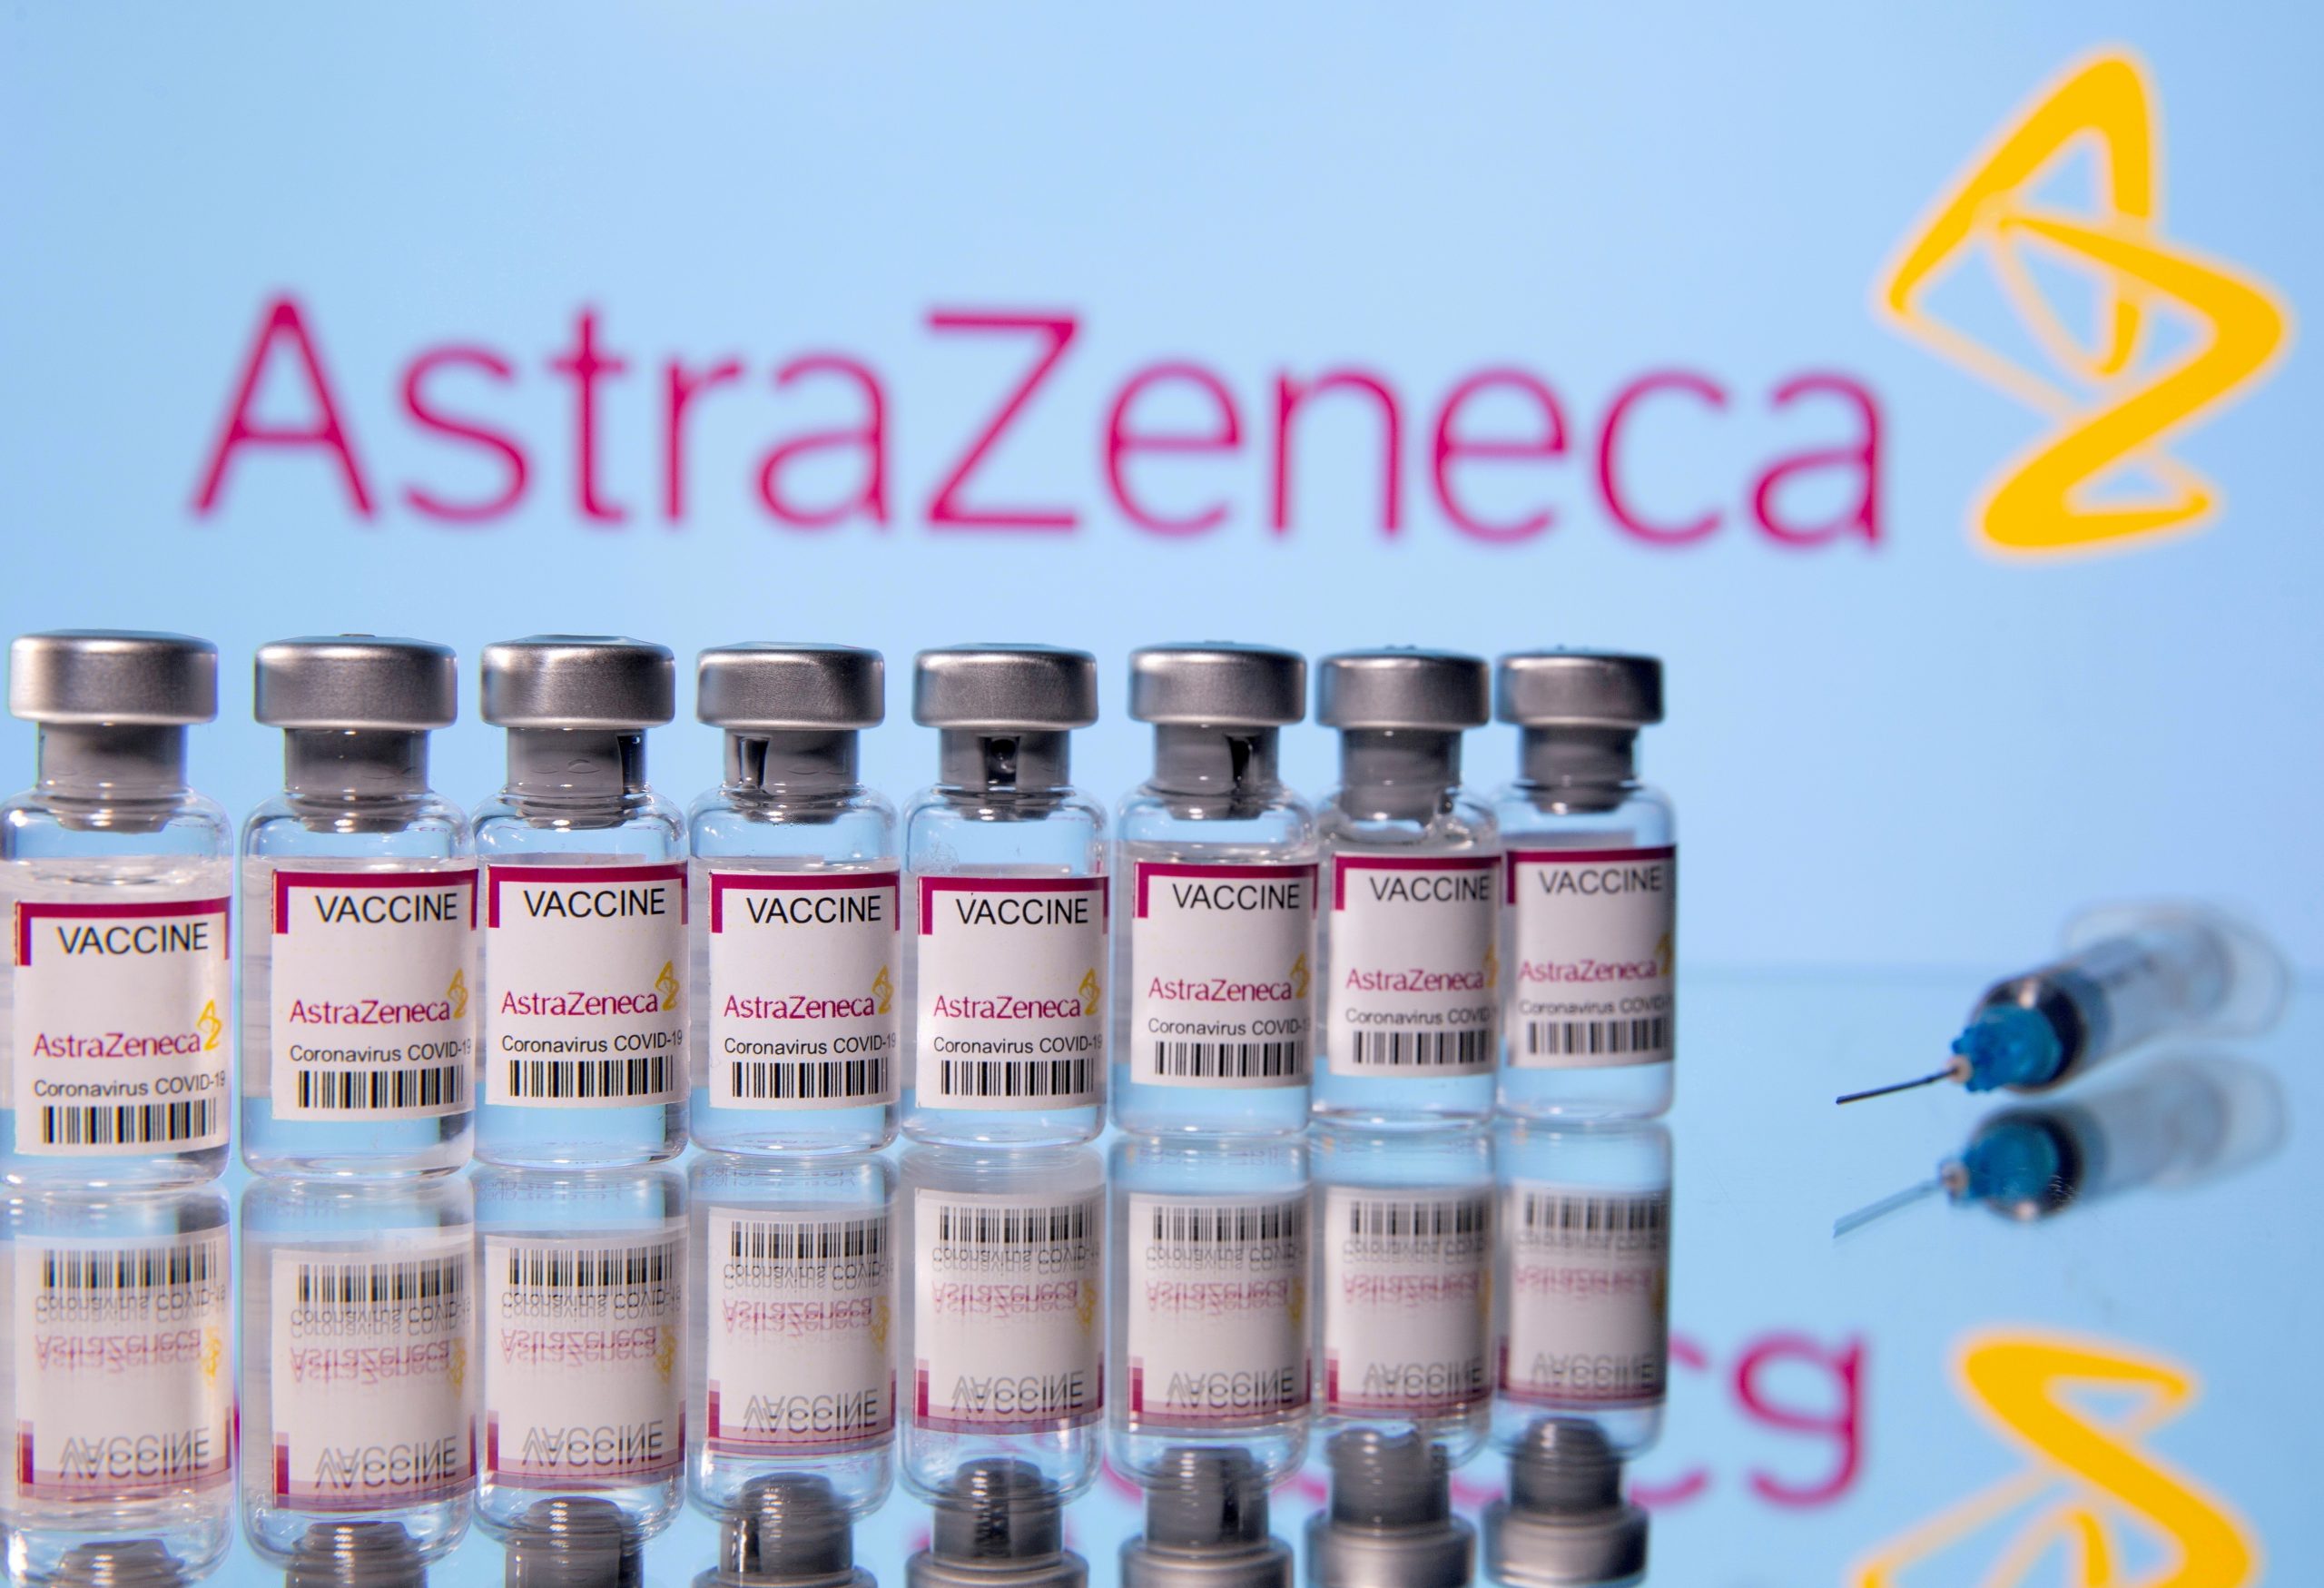 FILE PHOTO: Vials labelled 'Astra Zeneca COVID-19 Coronavirus Vaccine' and a syringe are seen in front of a displayed AstraZeneca logo in this illustration photo FILE PHOTO: Vials labelled "Astra Zeneca COVID-19 Coronavirus Vaccine" and a syringe are seen in front of a displayed AstraZeneca logo, in this illustration photo taken March 14, 2021. REUTERS/Dado Ruvic/Illustration/File Photo Dado Ruvic